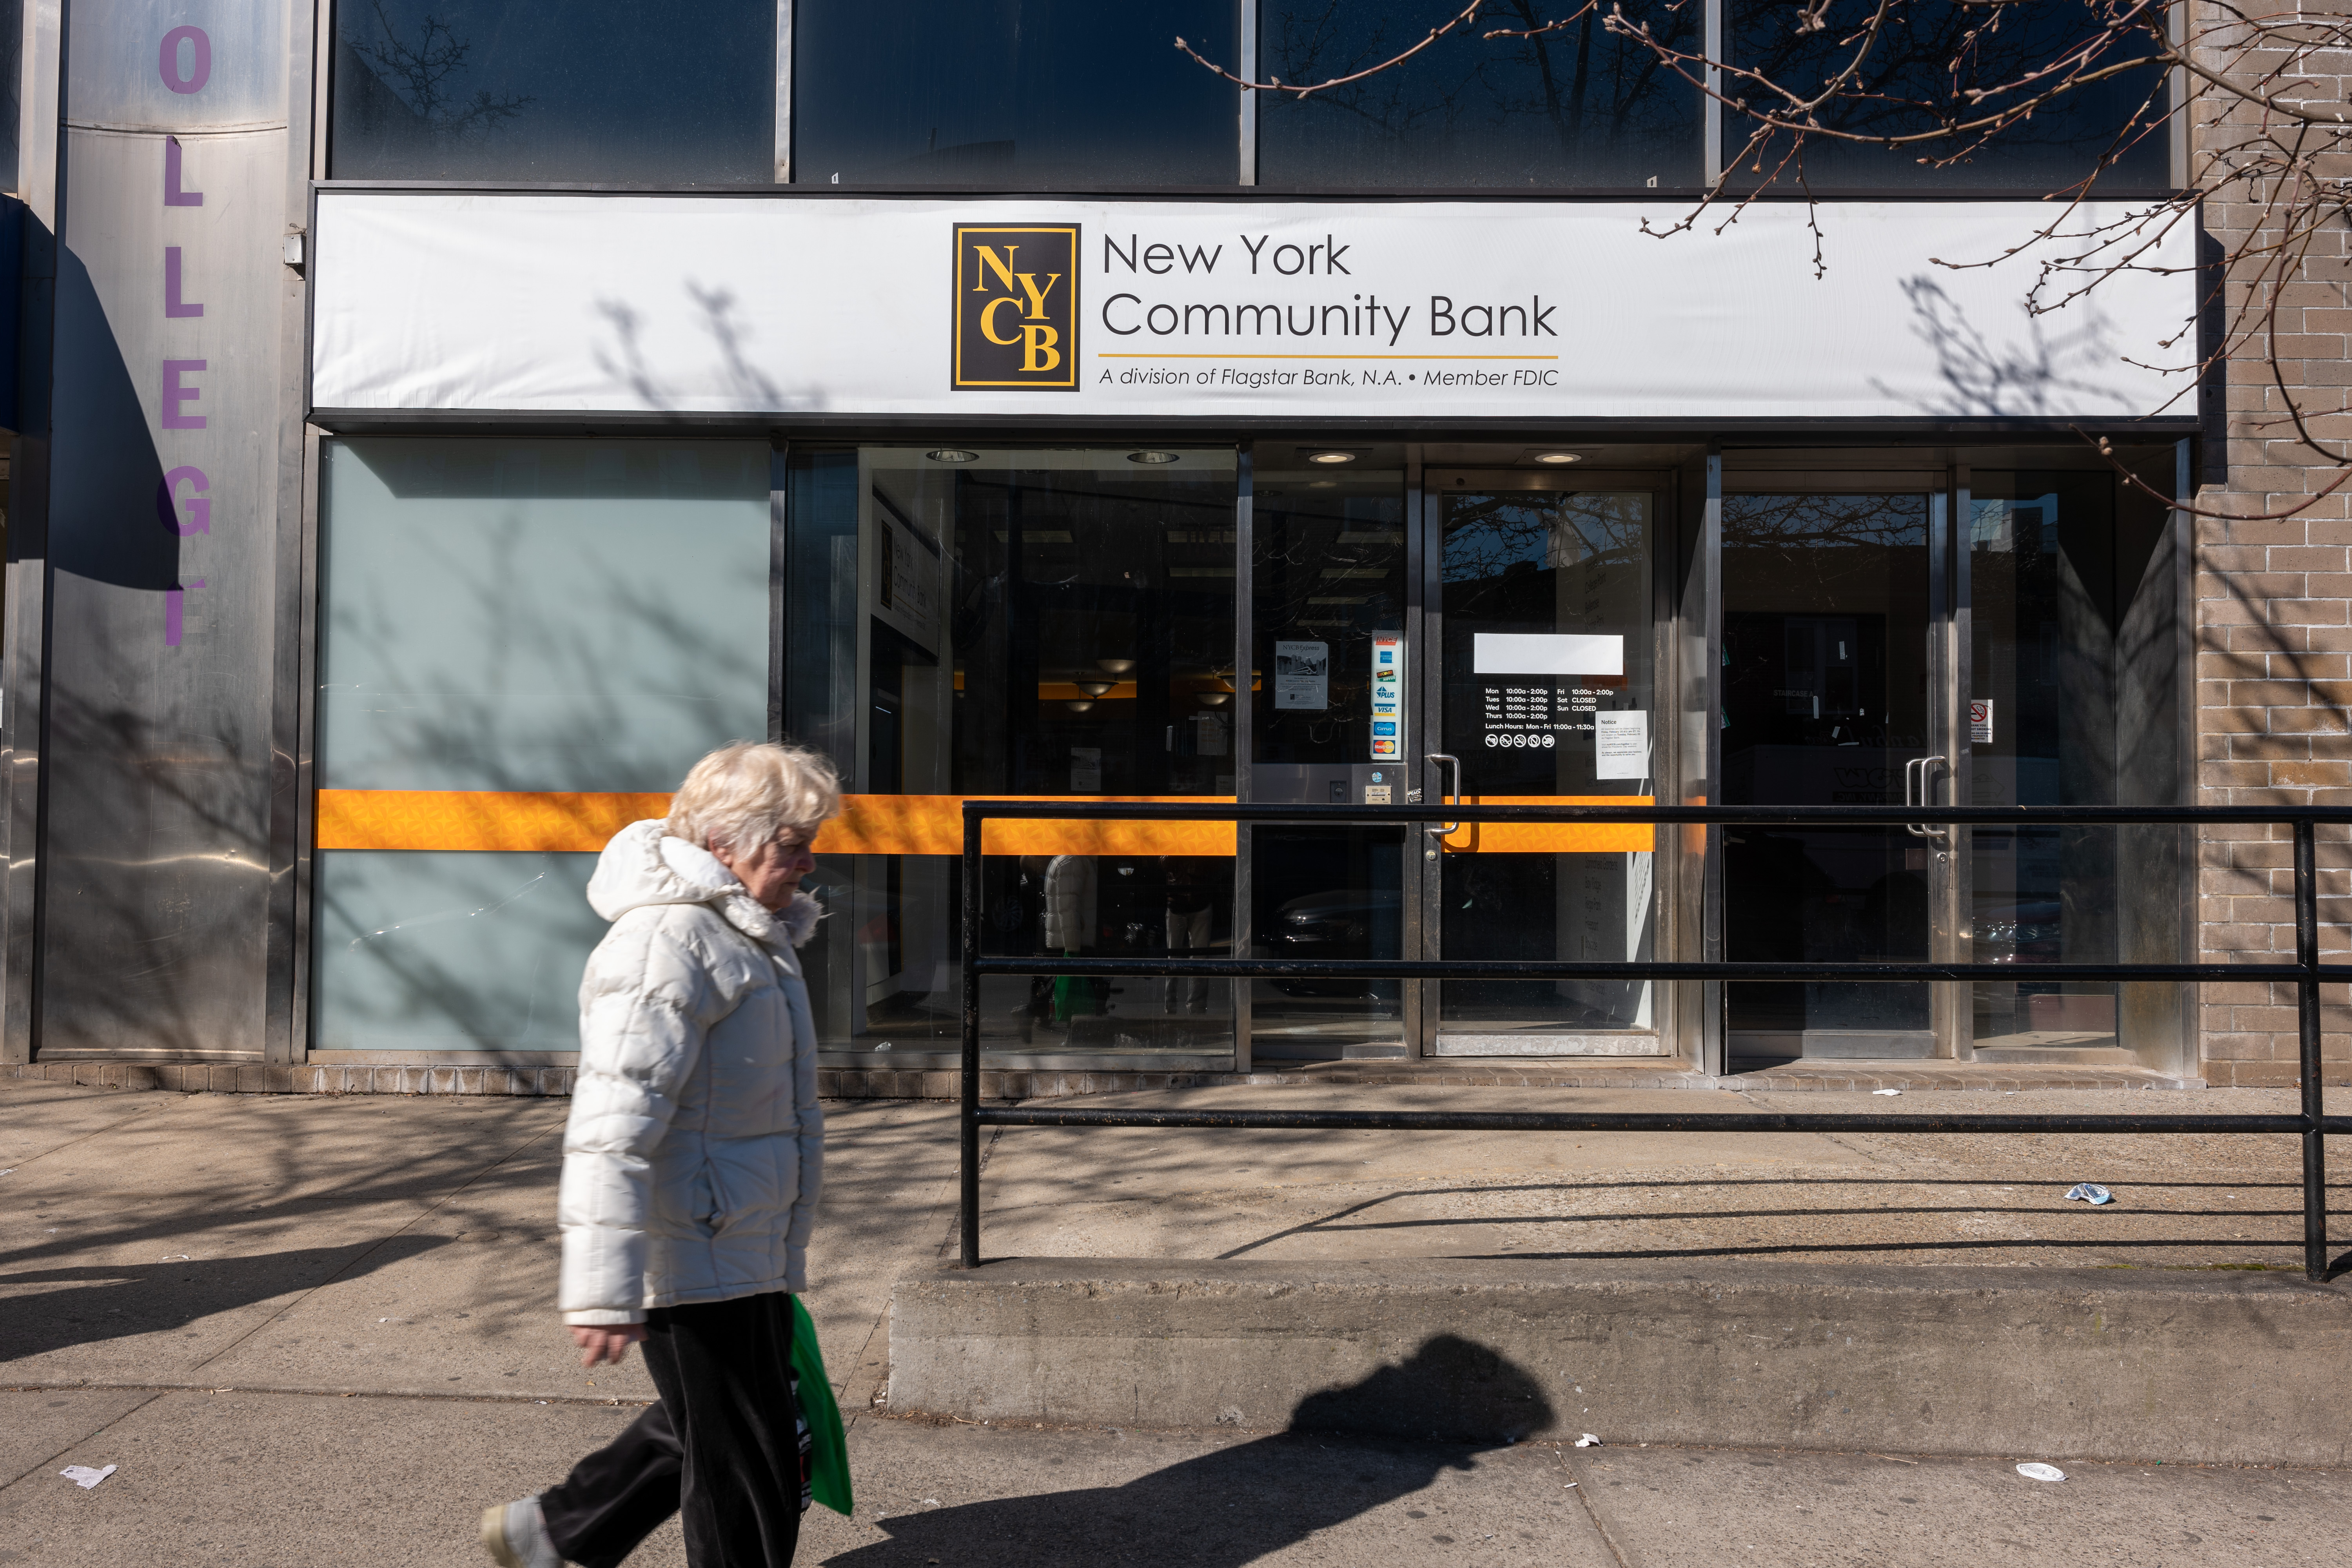 A person walks by a New York Community Bank in Brooklyn, New York, on February 8.